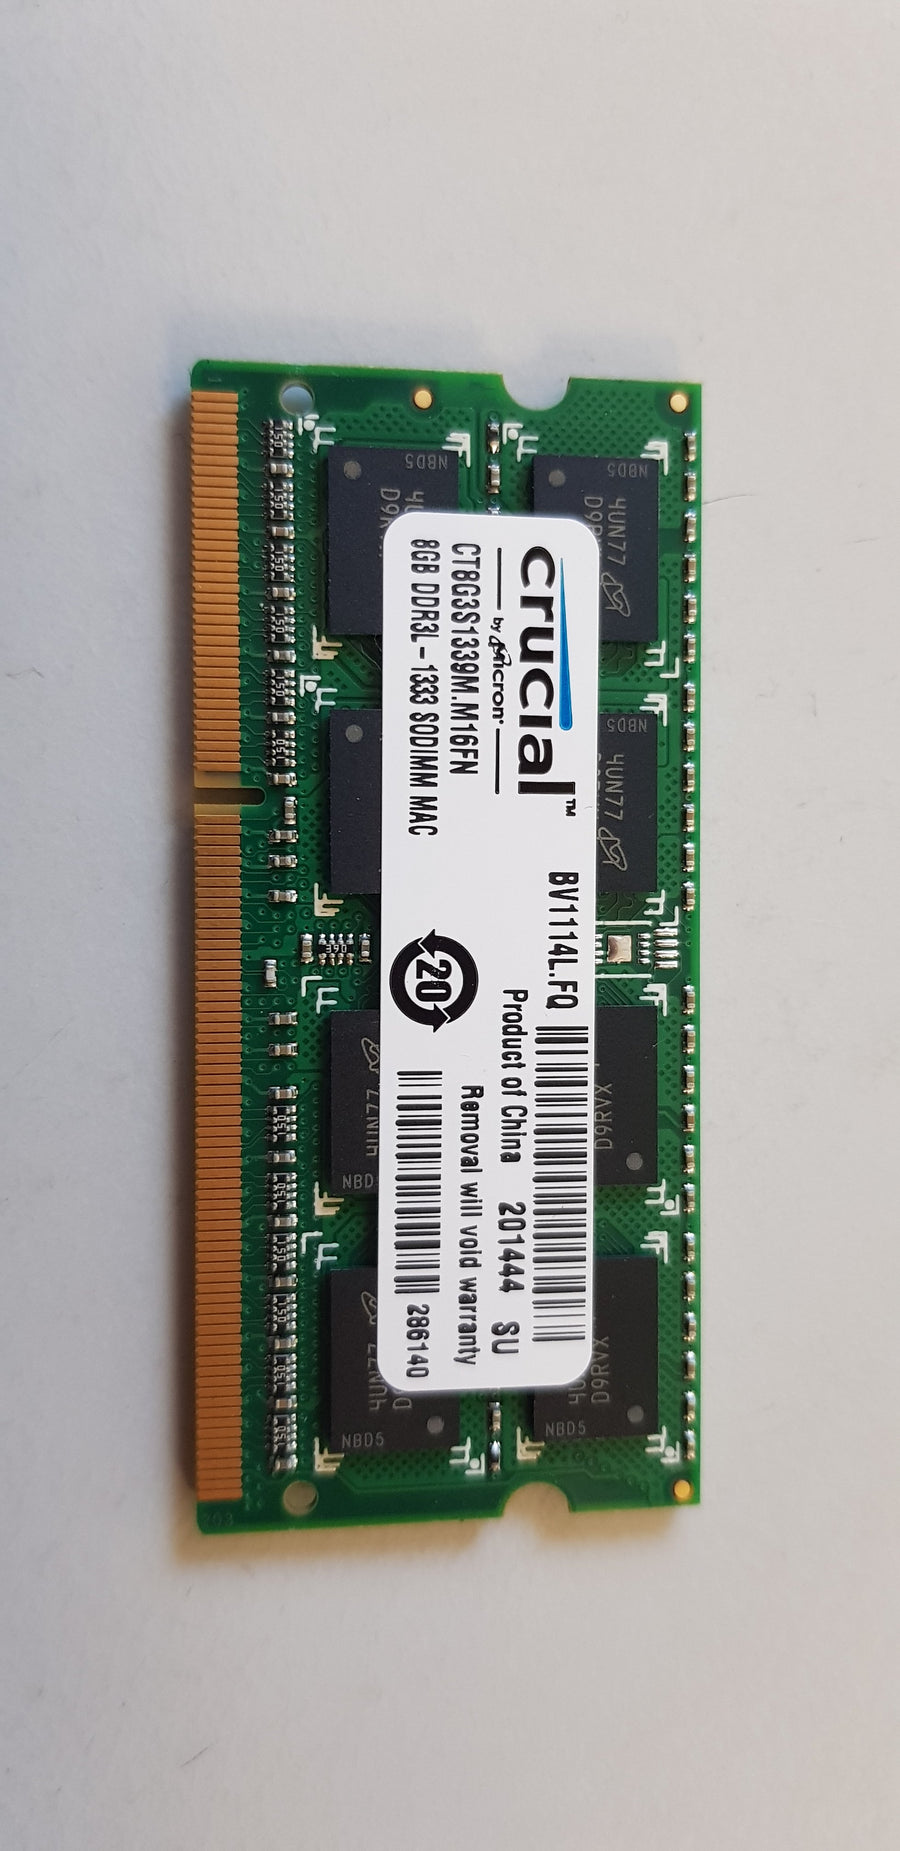 Crucial 8GB PC3-10600 DDR3-1333MHz non-ECC Unbuffered CL9 204-Pin SoDimm 1.35V Low Voltage Memory Module for Apple (CT8G3S1339M.M16FN)